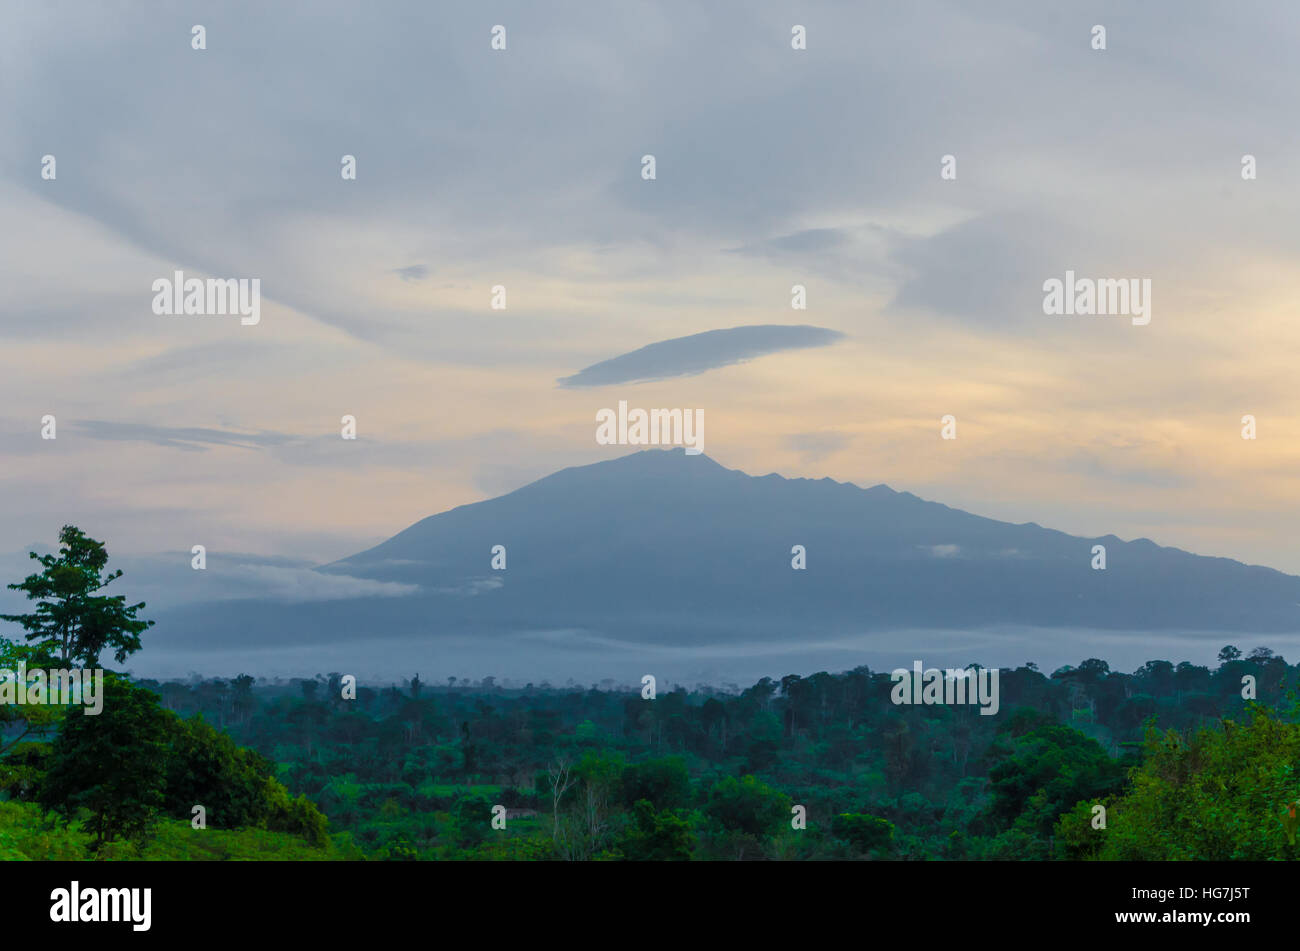 Mount Cameroon in the distance during evening light with cloudy sky and rain forest, Africa Stock Photo